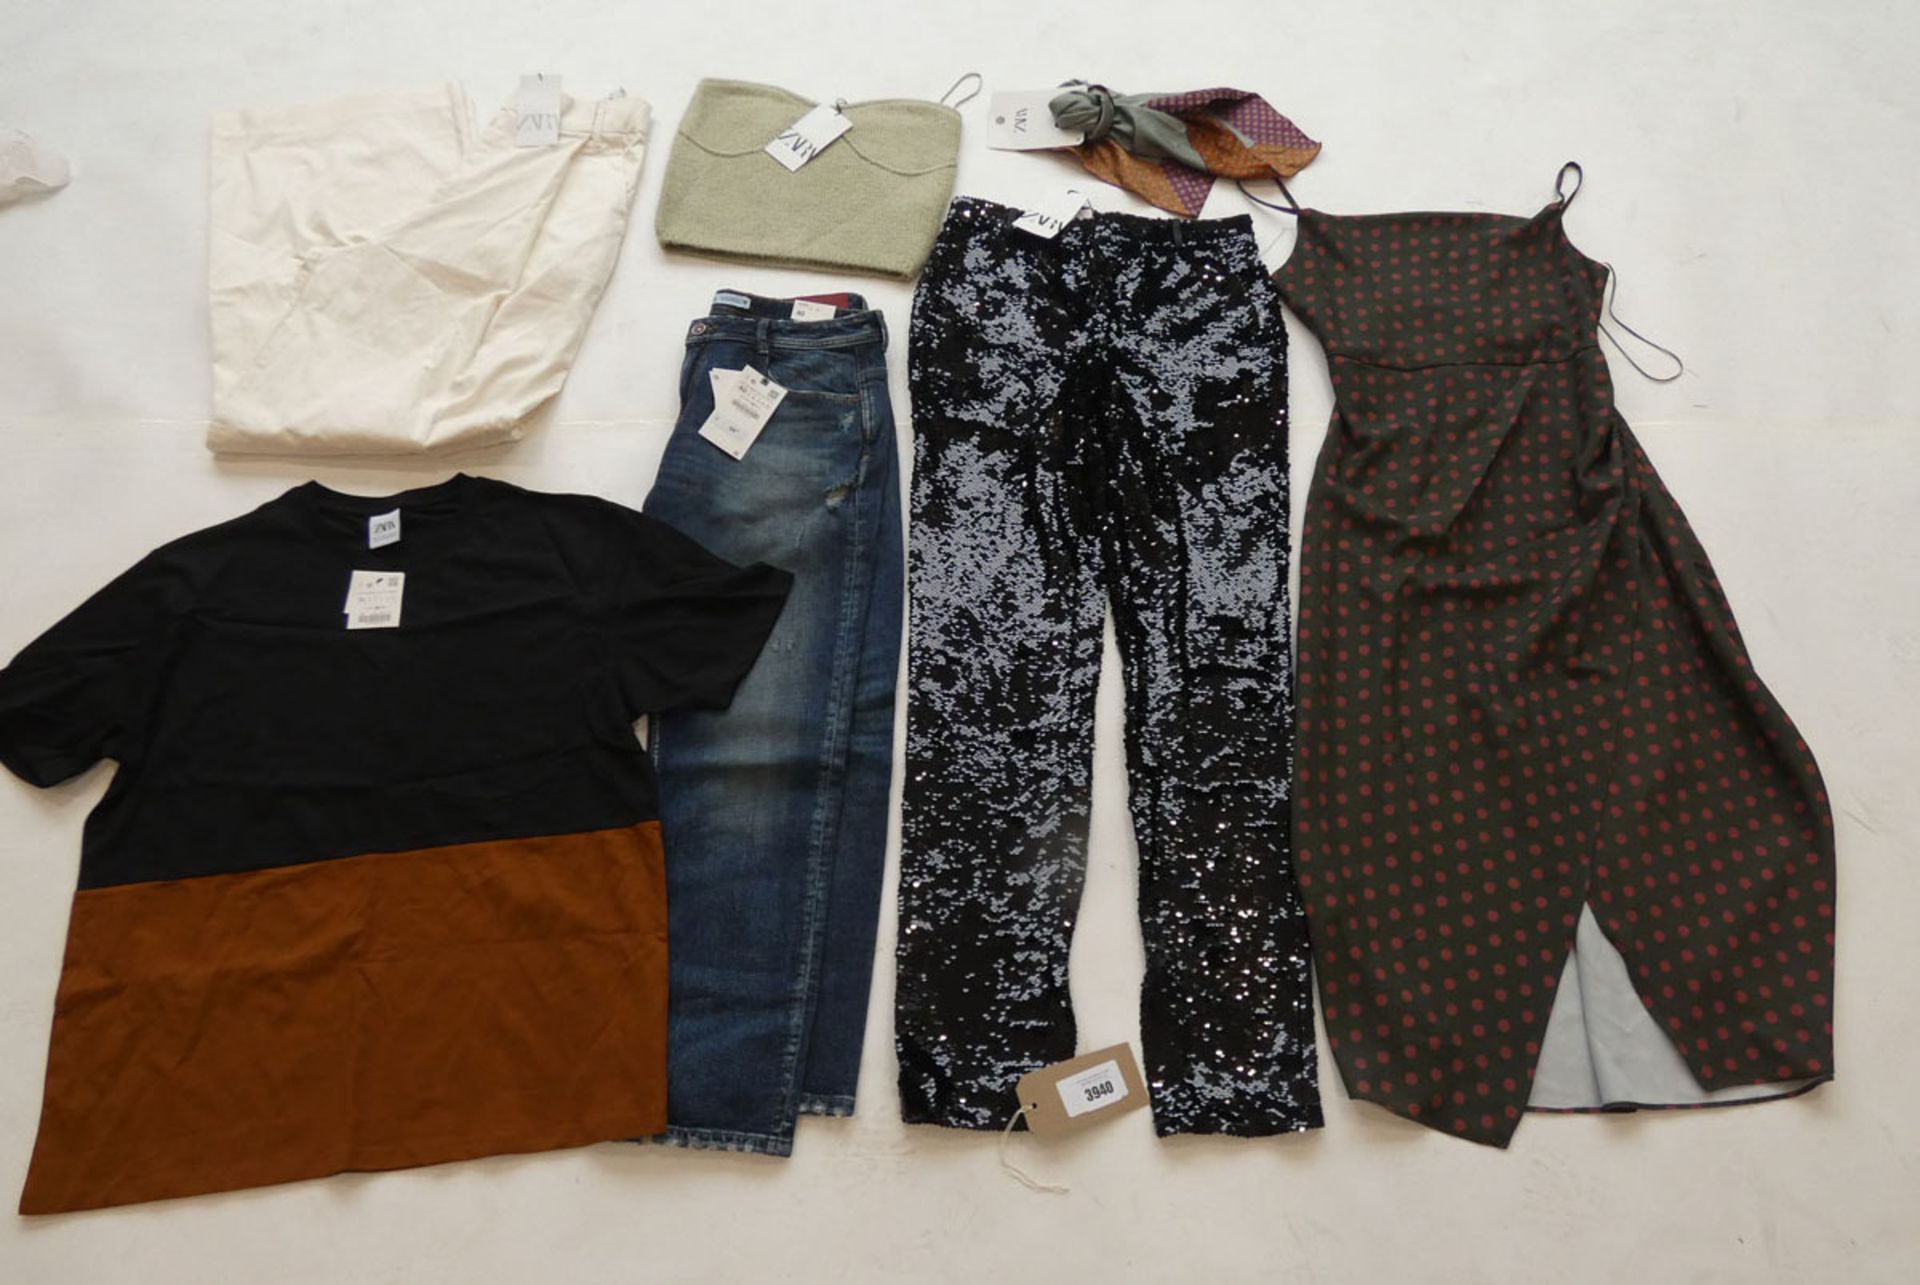 Selection of Zara clothing to include trousers, tops, dress, etc